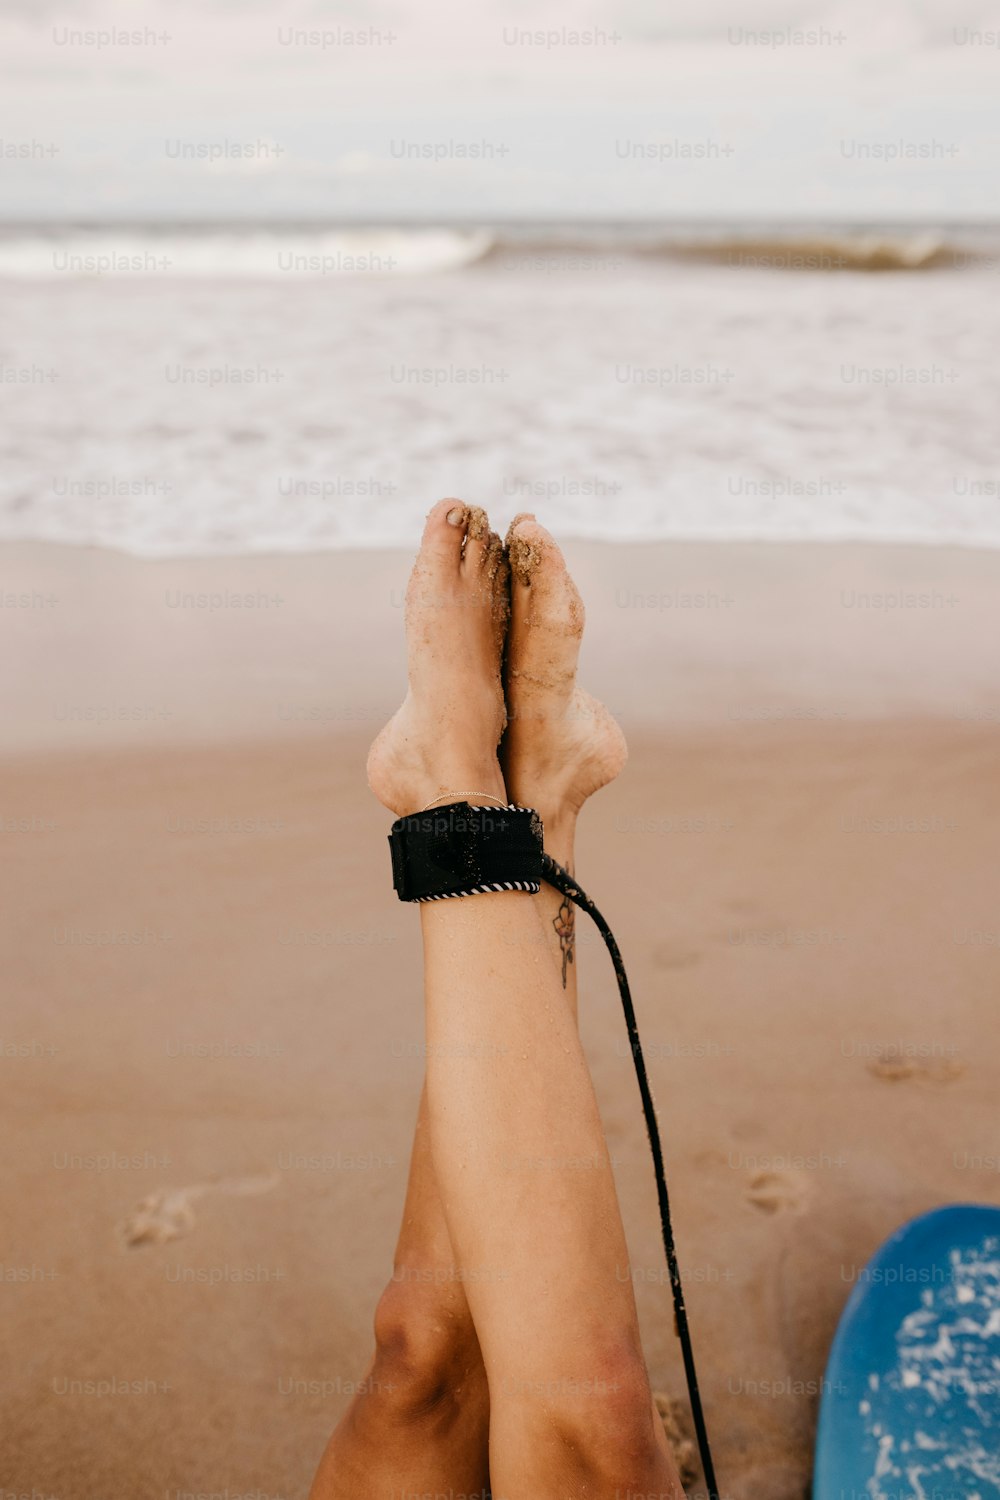 a person with their feet up on the beach